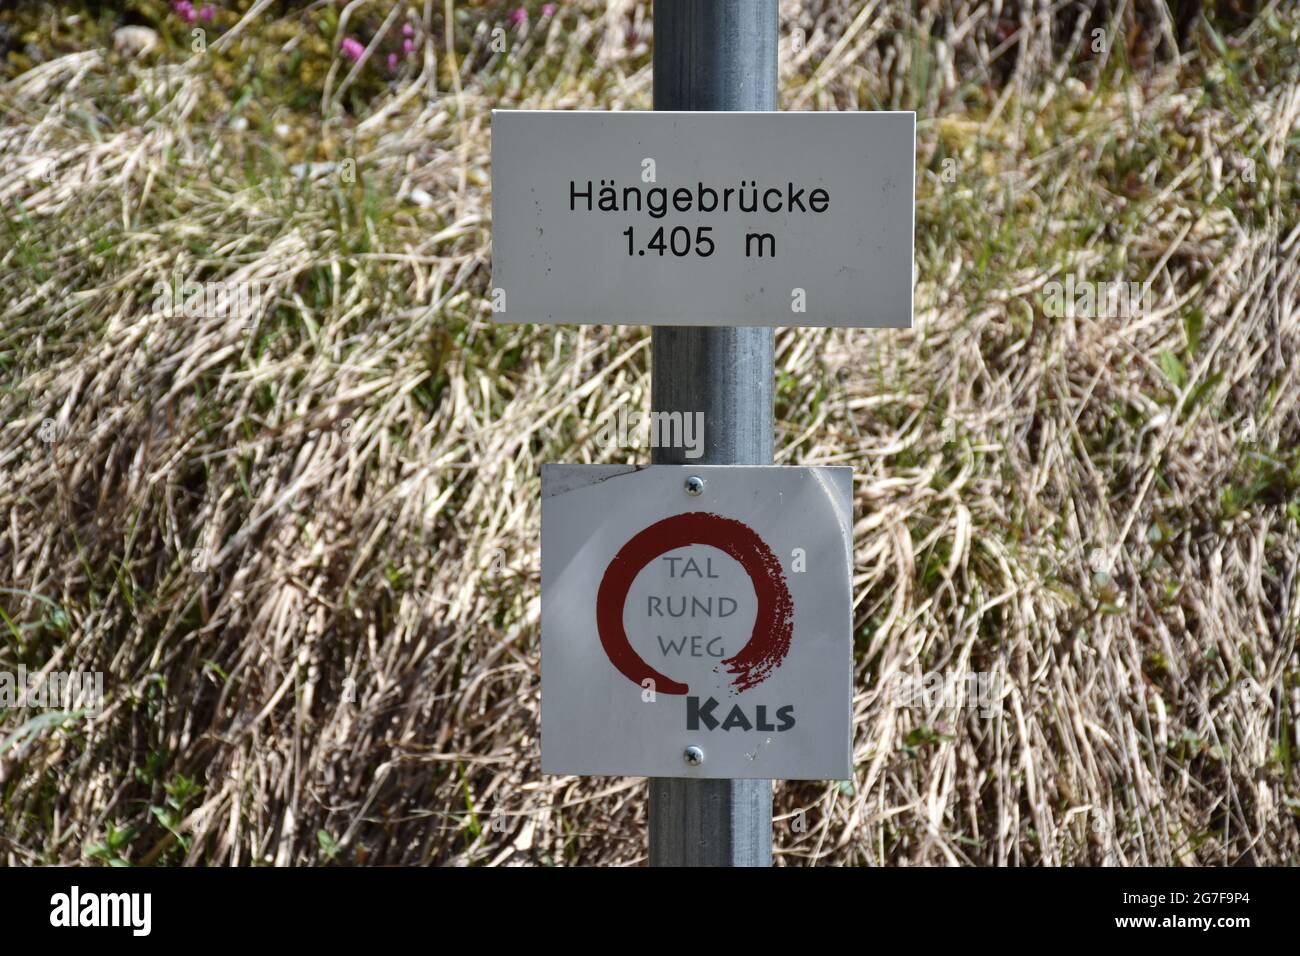 Schild Information High Resolution Stock Photography and Images - Alamy